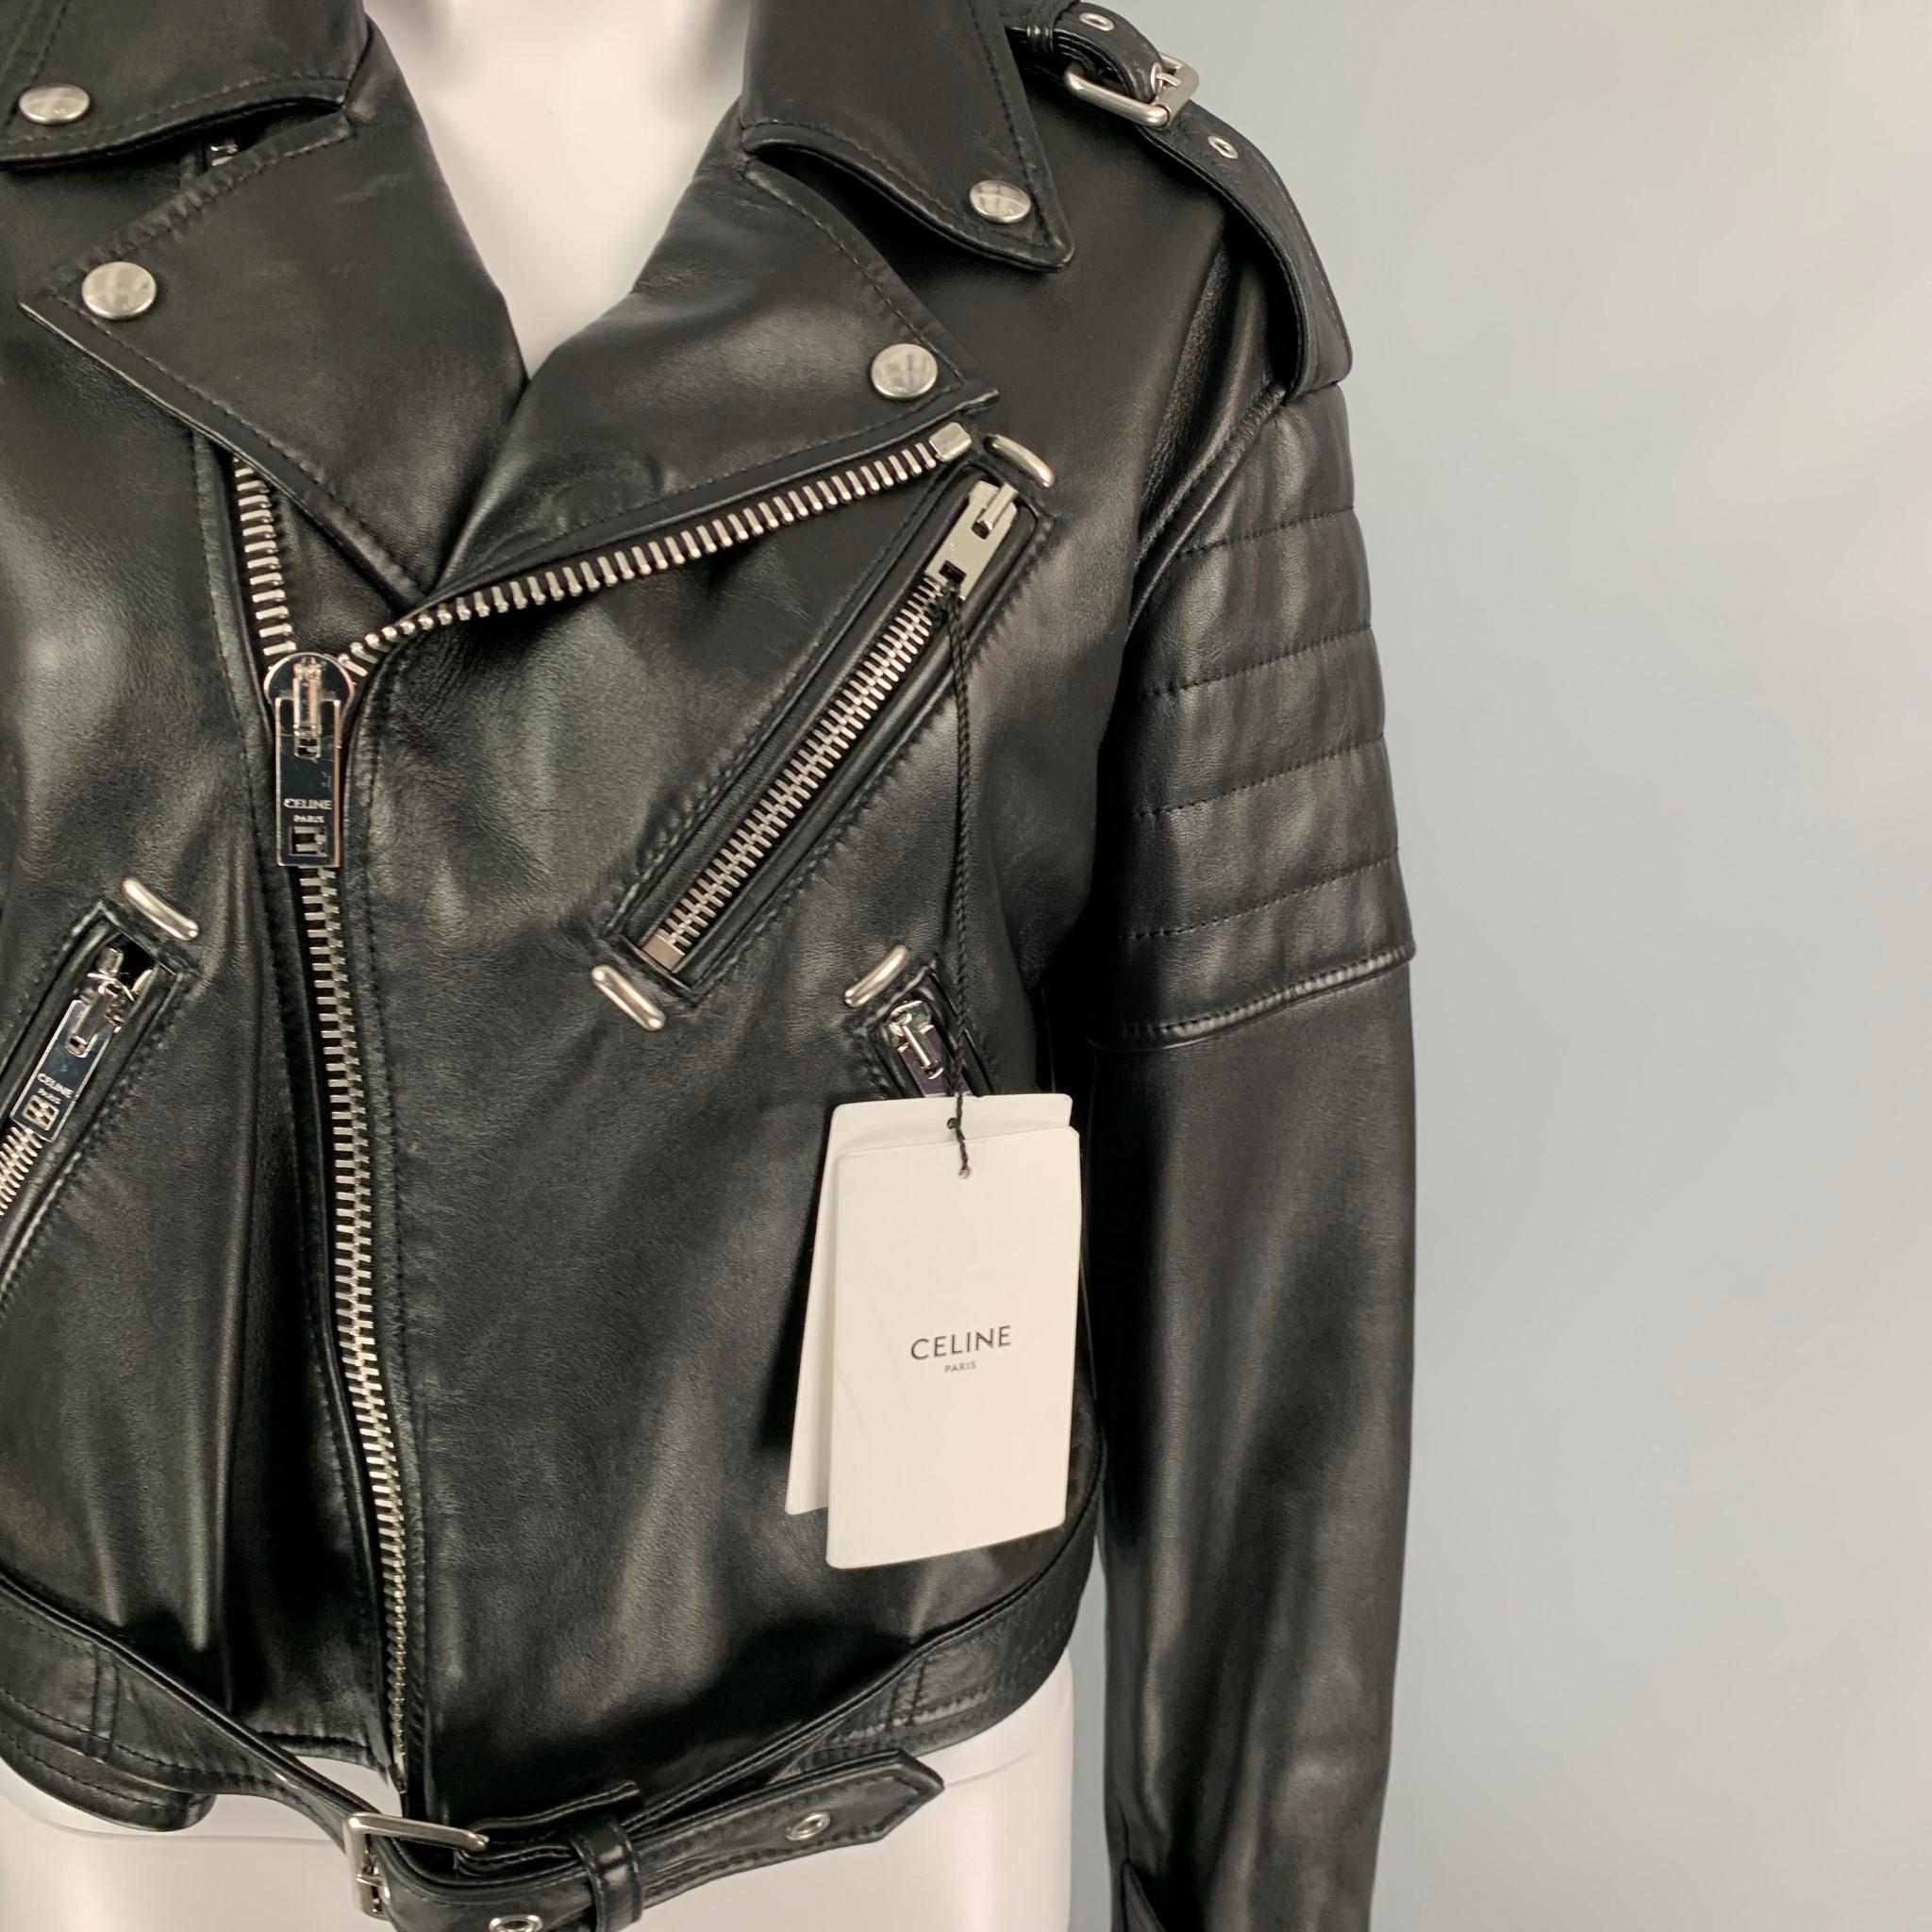 CELINE jacket comes in a black leather featuring a motorcycle style, cropped fit, silver tone hardware, padded panels, epaulettes, and a zip up closure. 

New with tags. 
Marked: 42
Original Retail Price: $5,200.000000

Measurements:

Shoulder: 19